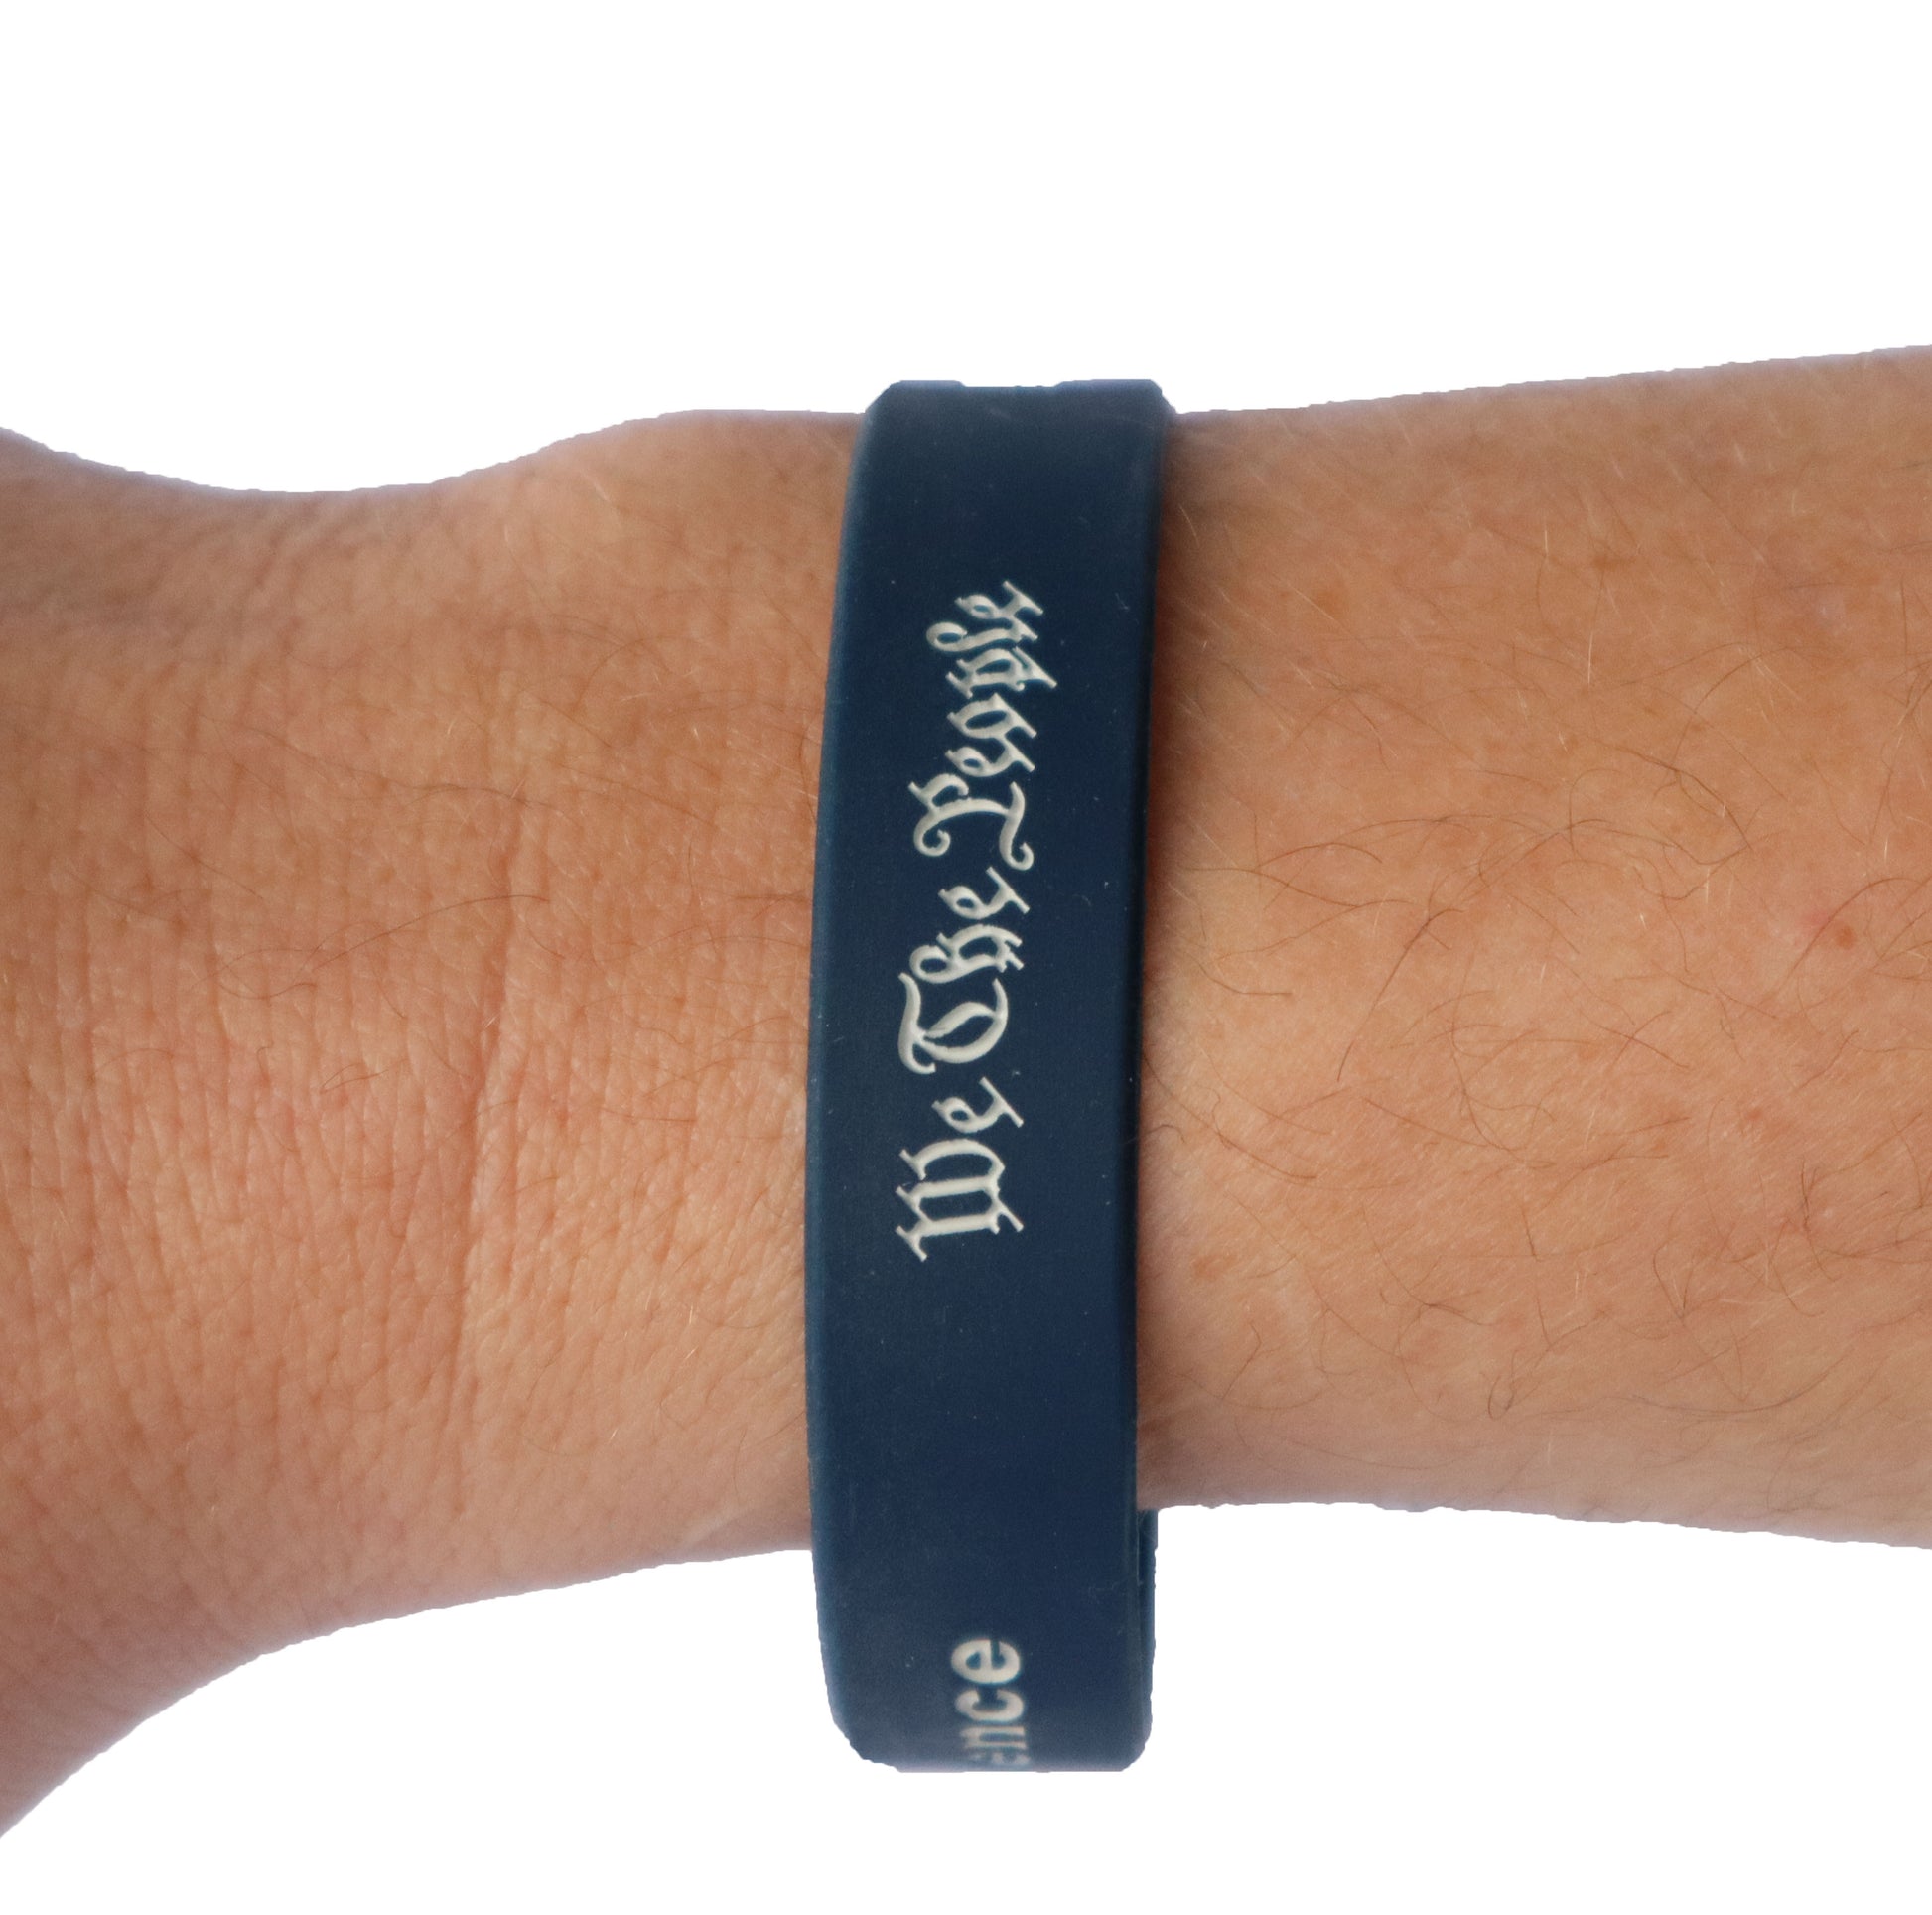 Solid Silicone Wristbands - Embossed - The Wristband Man